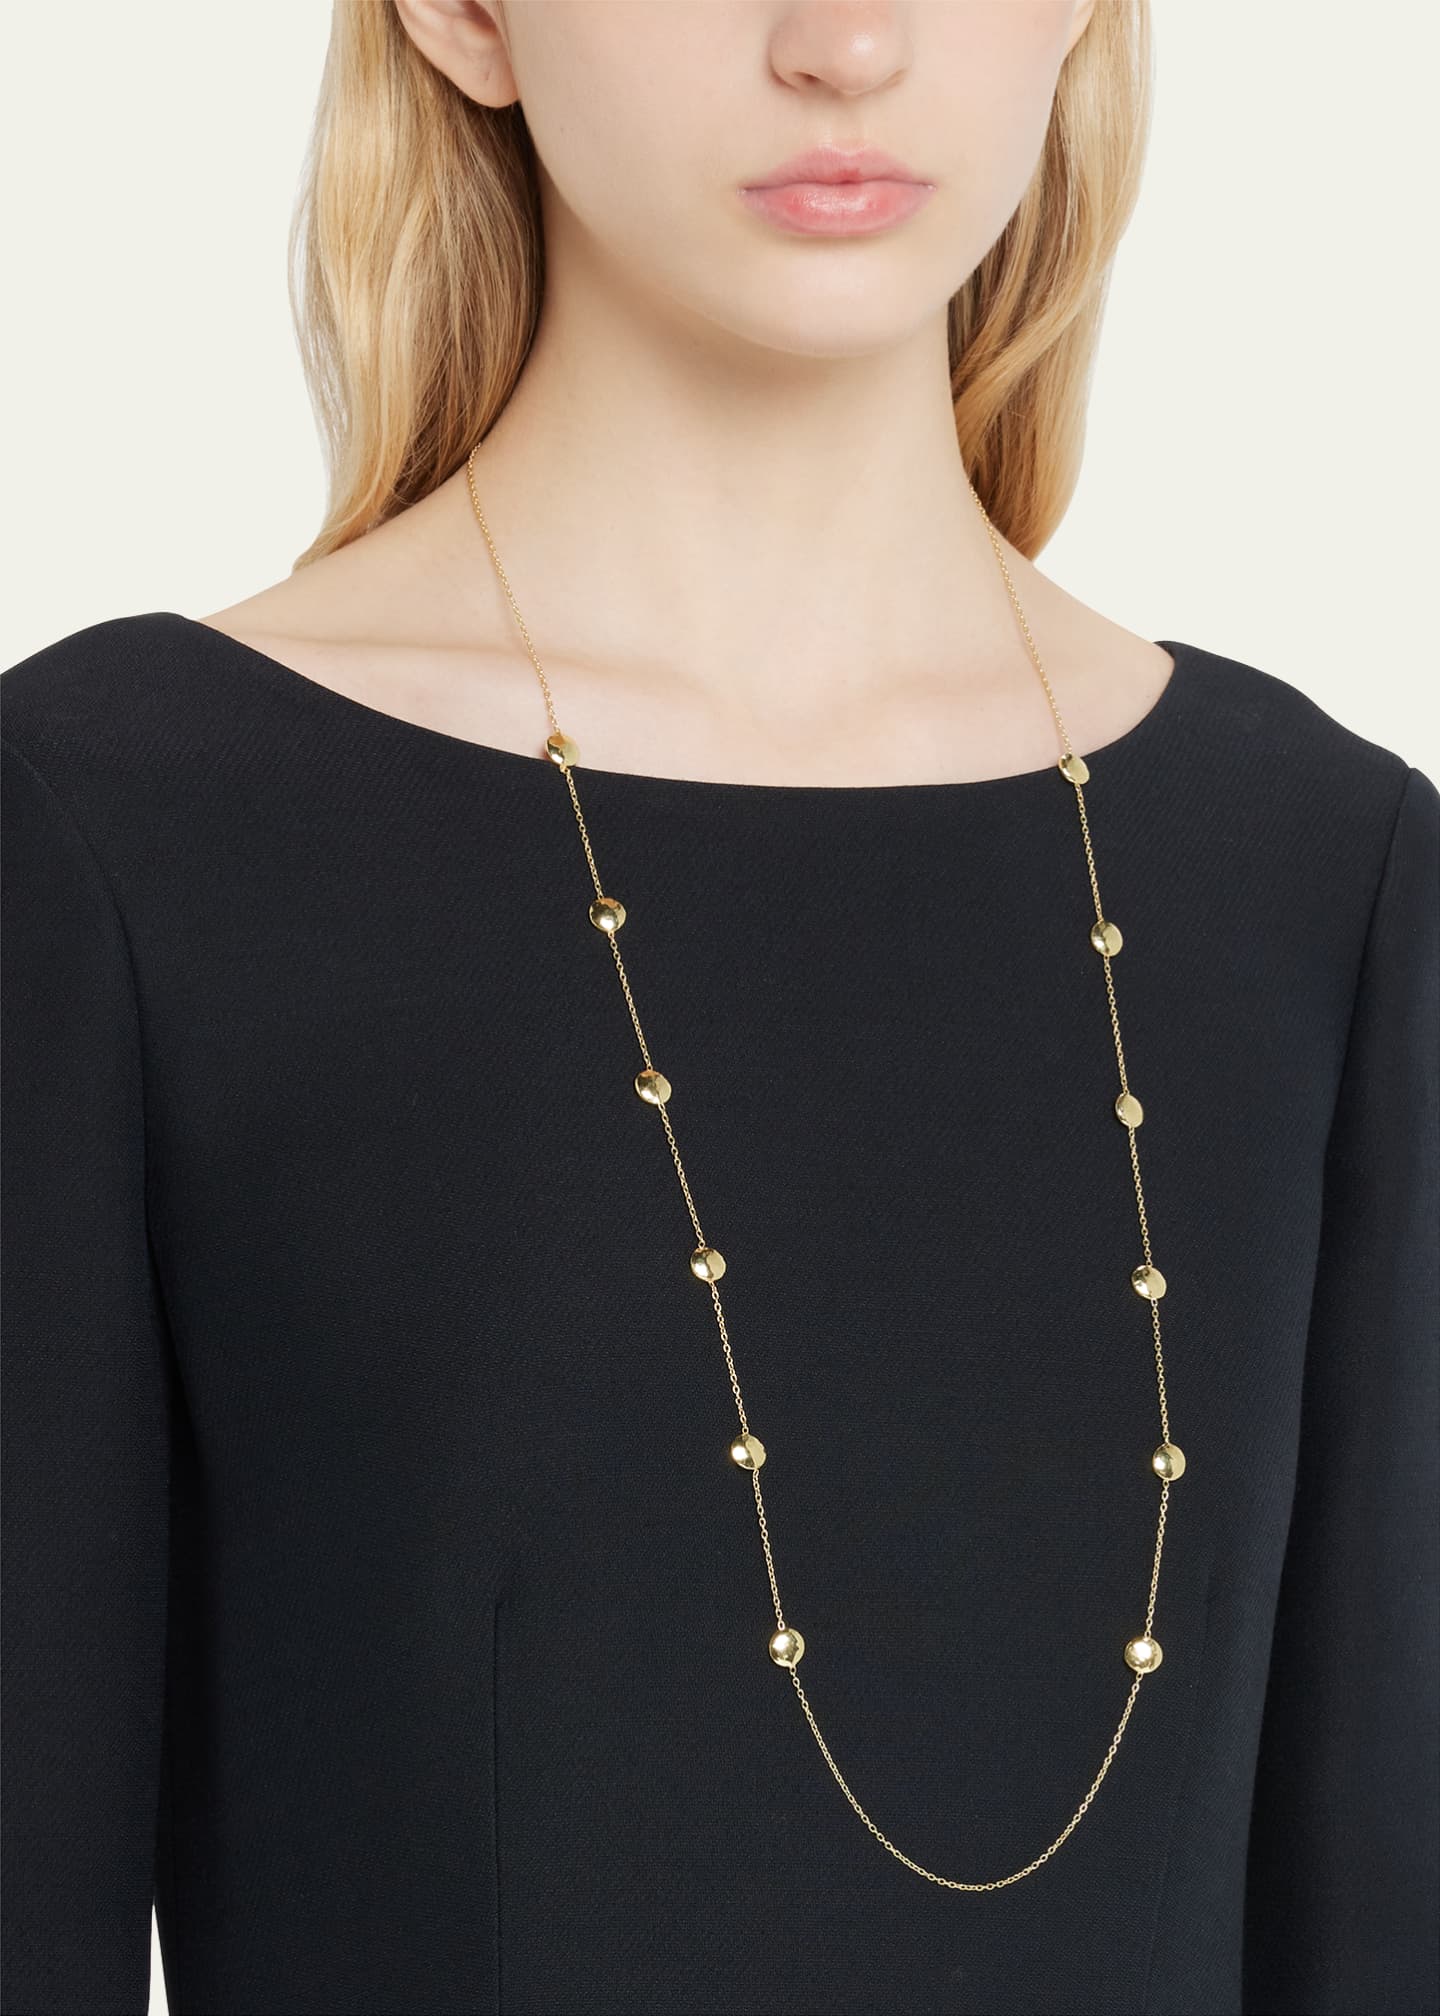 Ippolita Long Hammered Pinball Layering Necklace in 18K Gold Image 2 of 4